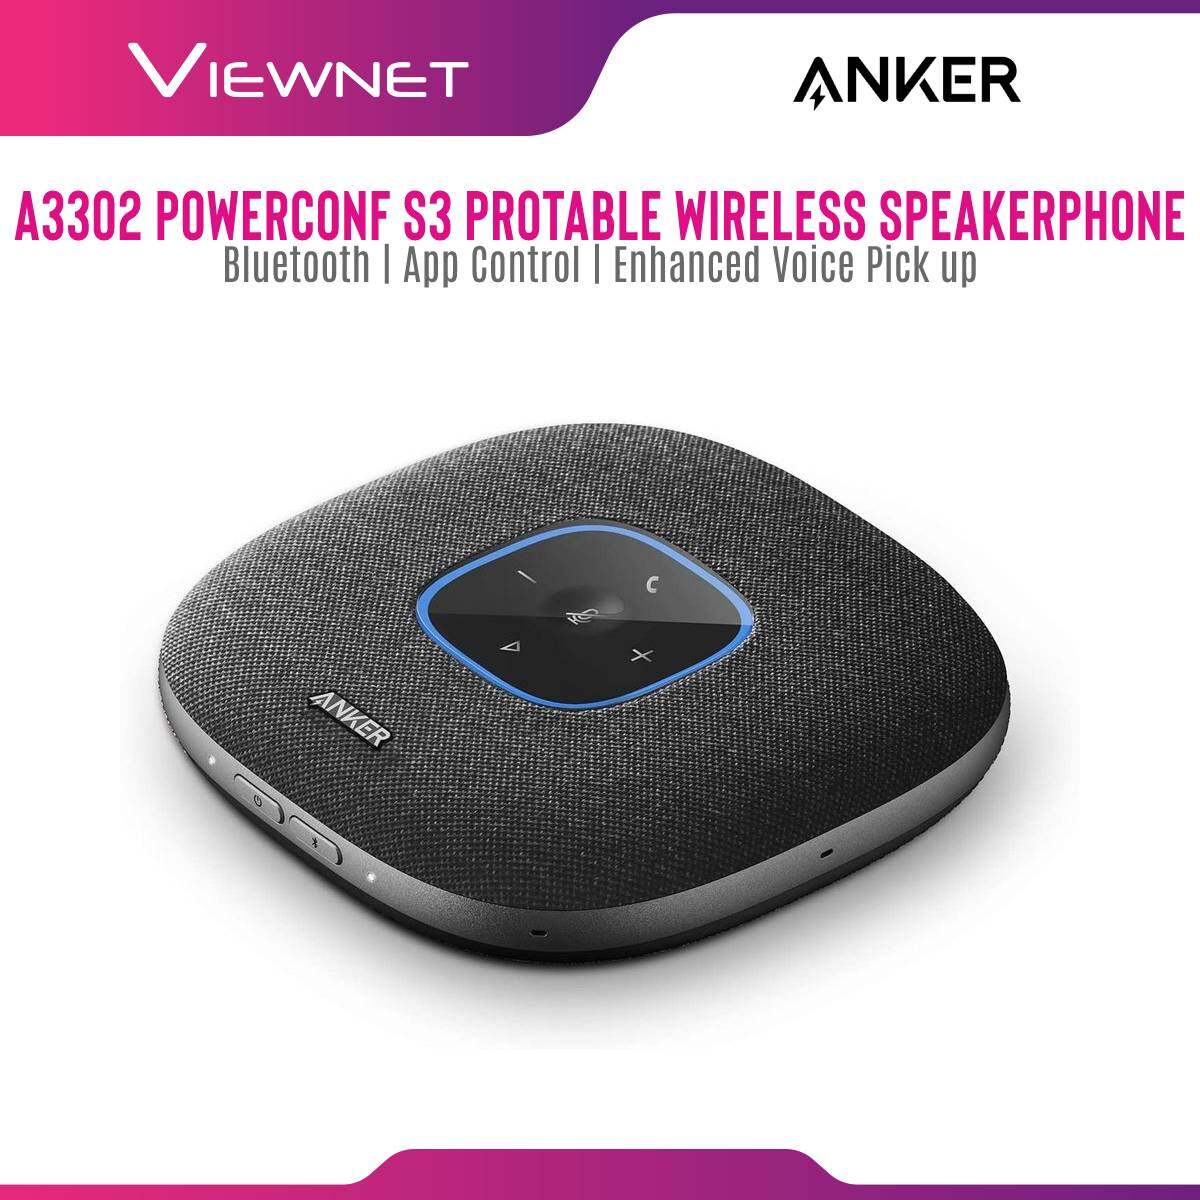 Anker A3302 Powerconf S3 Protable Wireless Speakerphone , with Build in Microphone